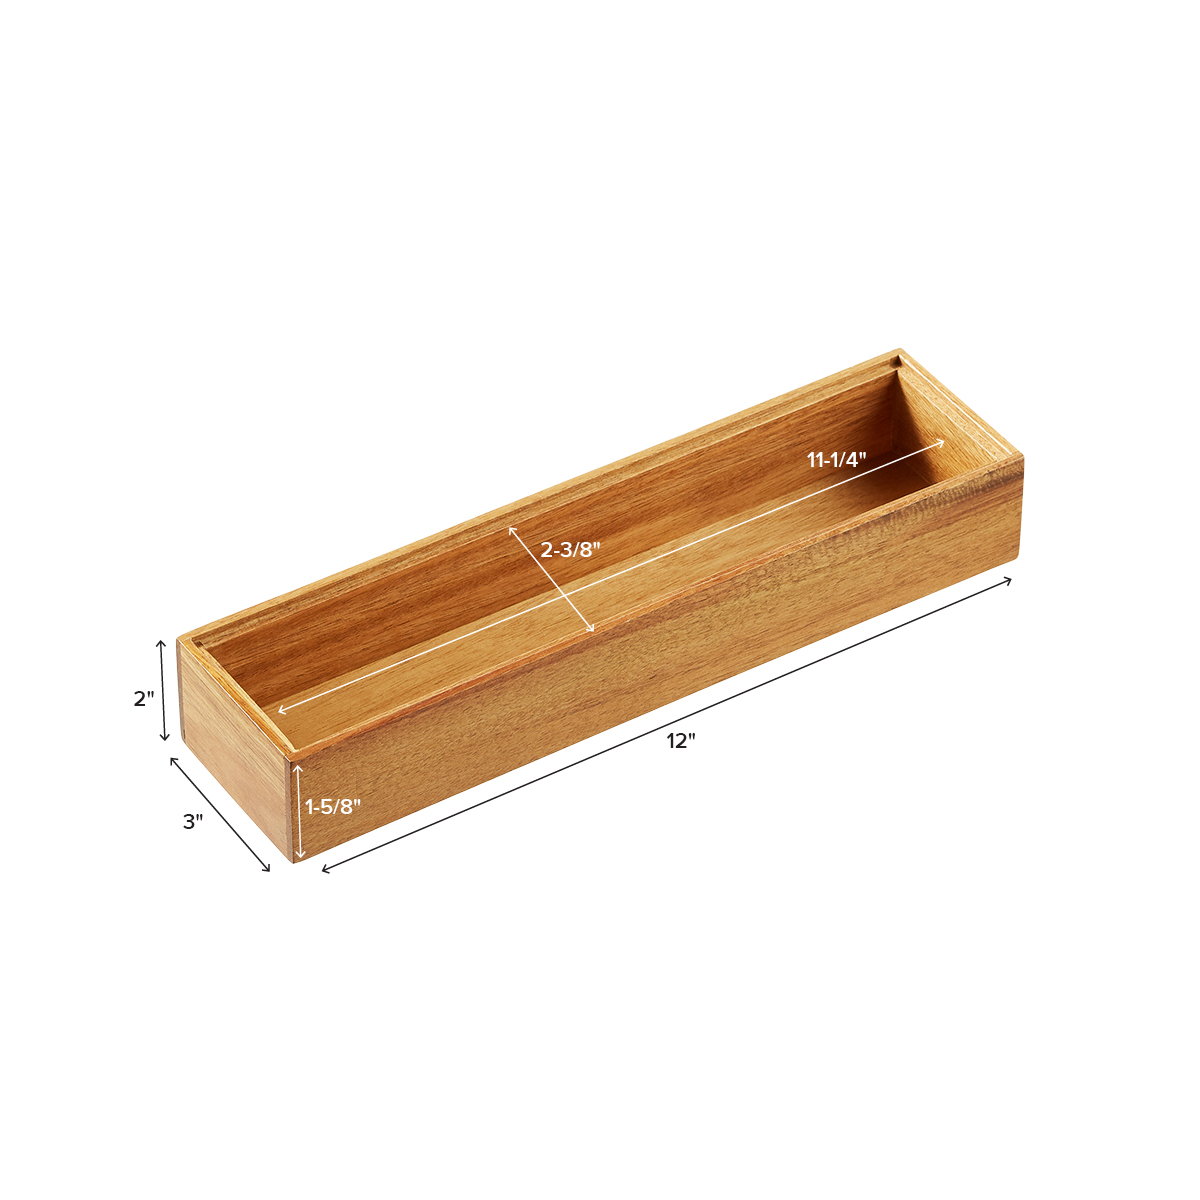 https://www.containerstore.com/catalogimages/418454/10079622-acacia-stacking-drawer-orga.jpg